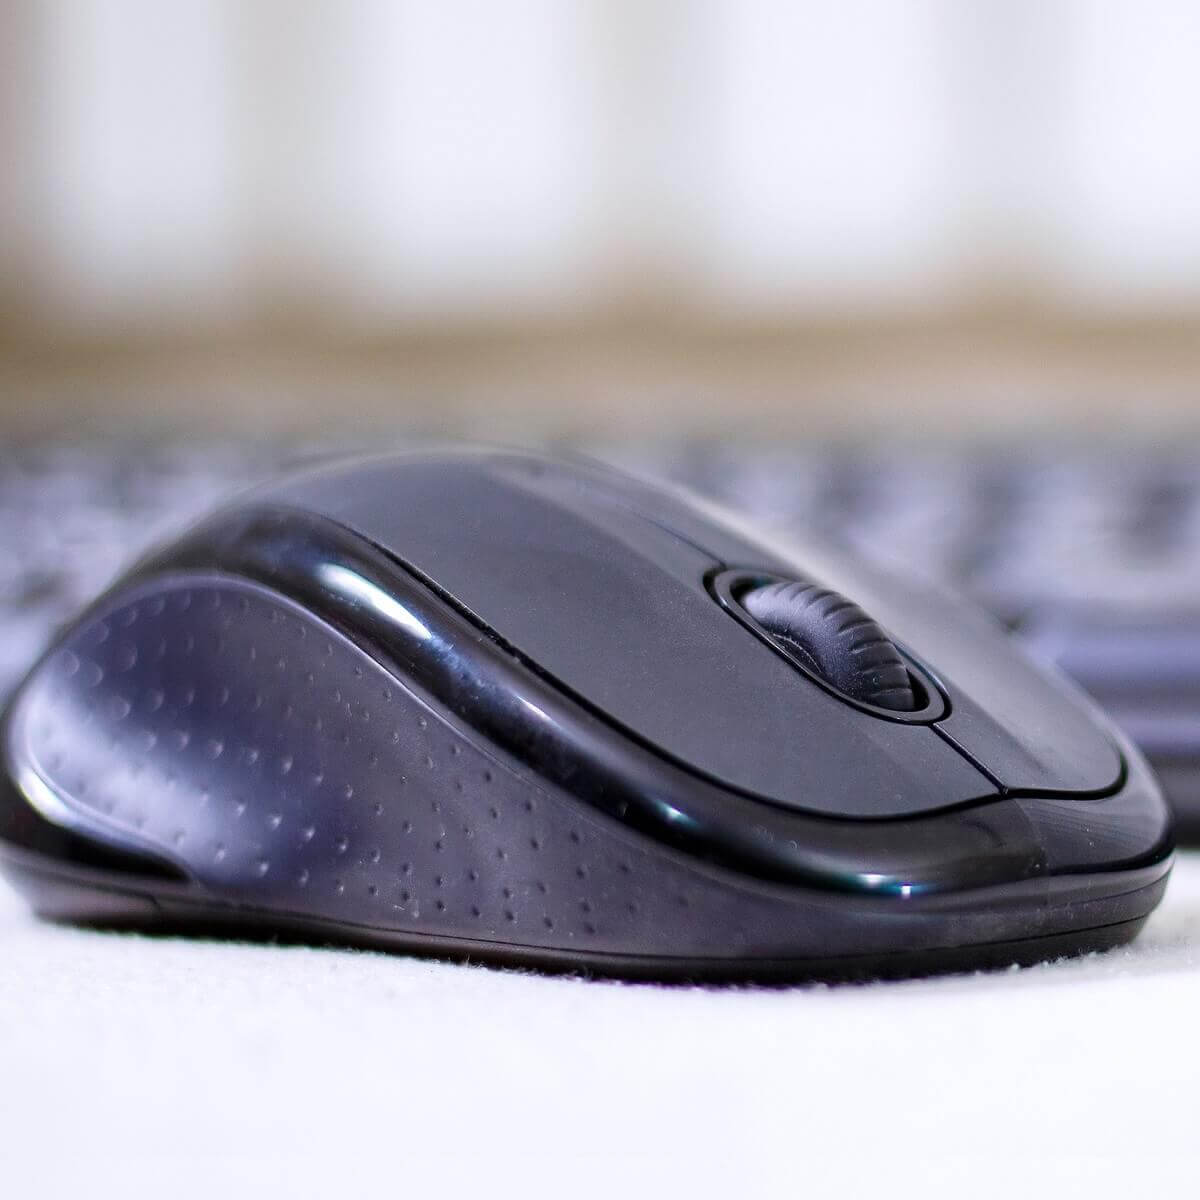 what to do if Latest Windows 10 updates break your mouse